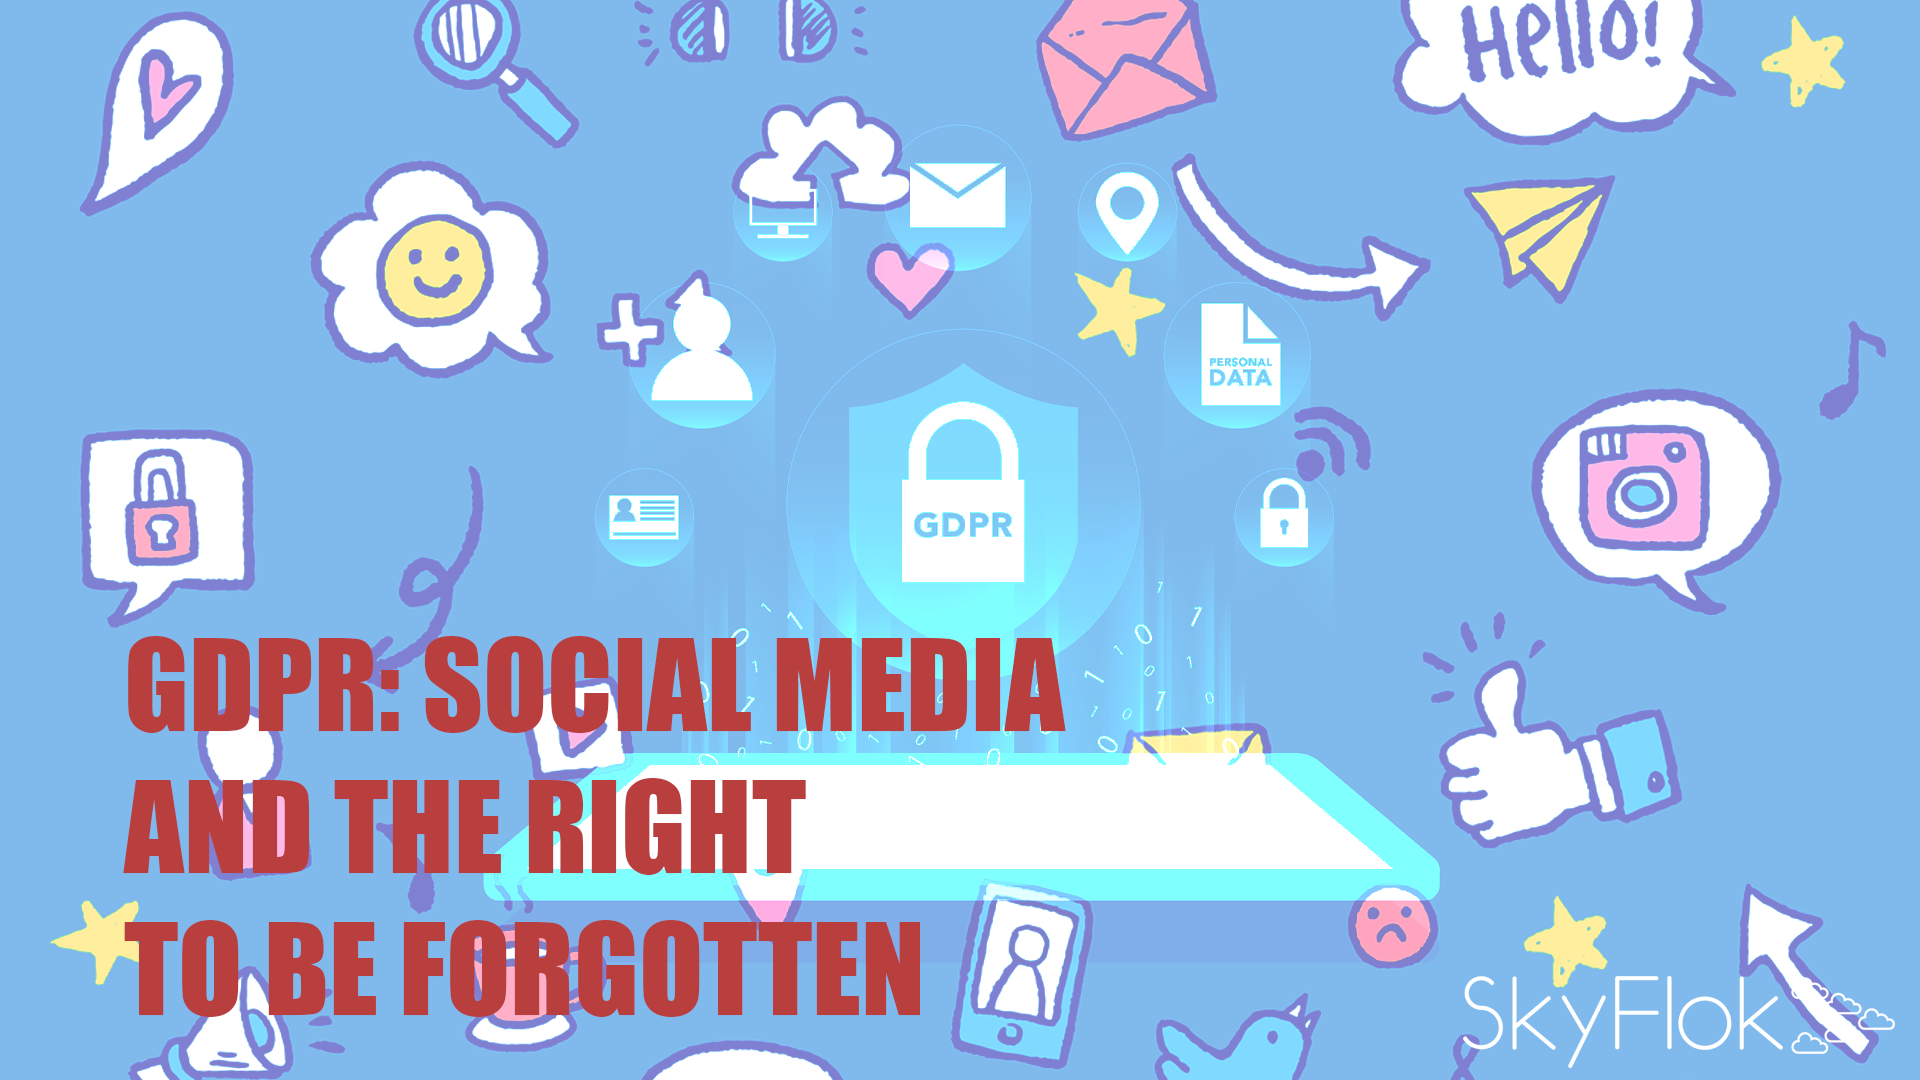 GDPR: social media and the right to be forgotten